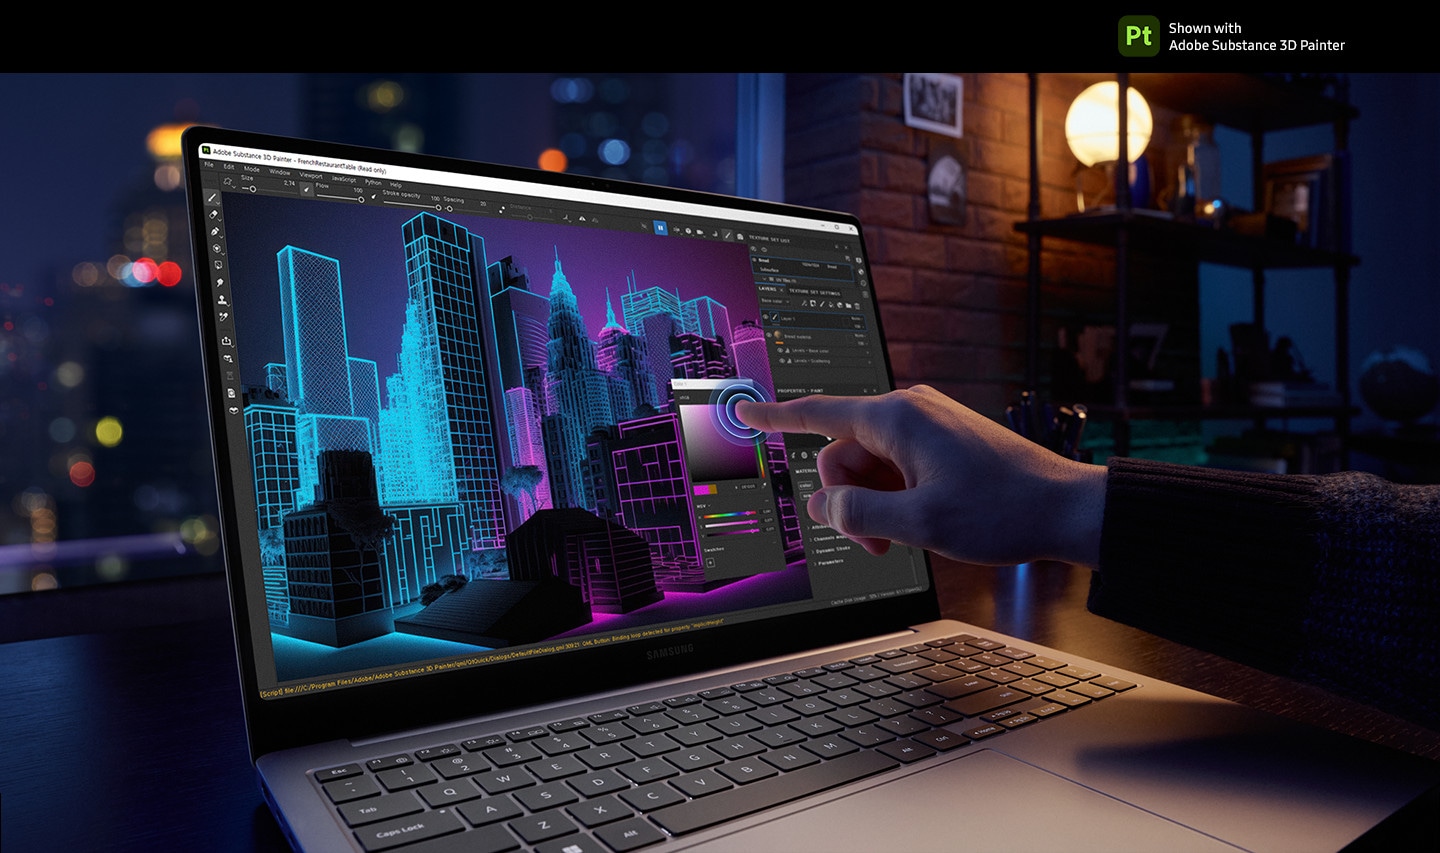 Galaxy Book4 Ultra is open, facing forward with a colorful graphic image of tall buildings open for editing in Adobe Substance 3D Painter app onscreen and a person's finger tapping on the touchscreen to select the color. Adobe Substance 3D Painter logo is shown.